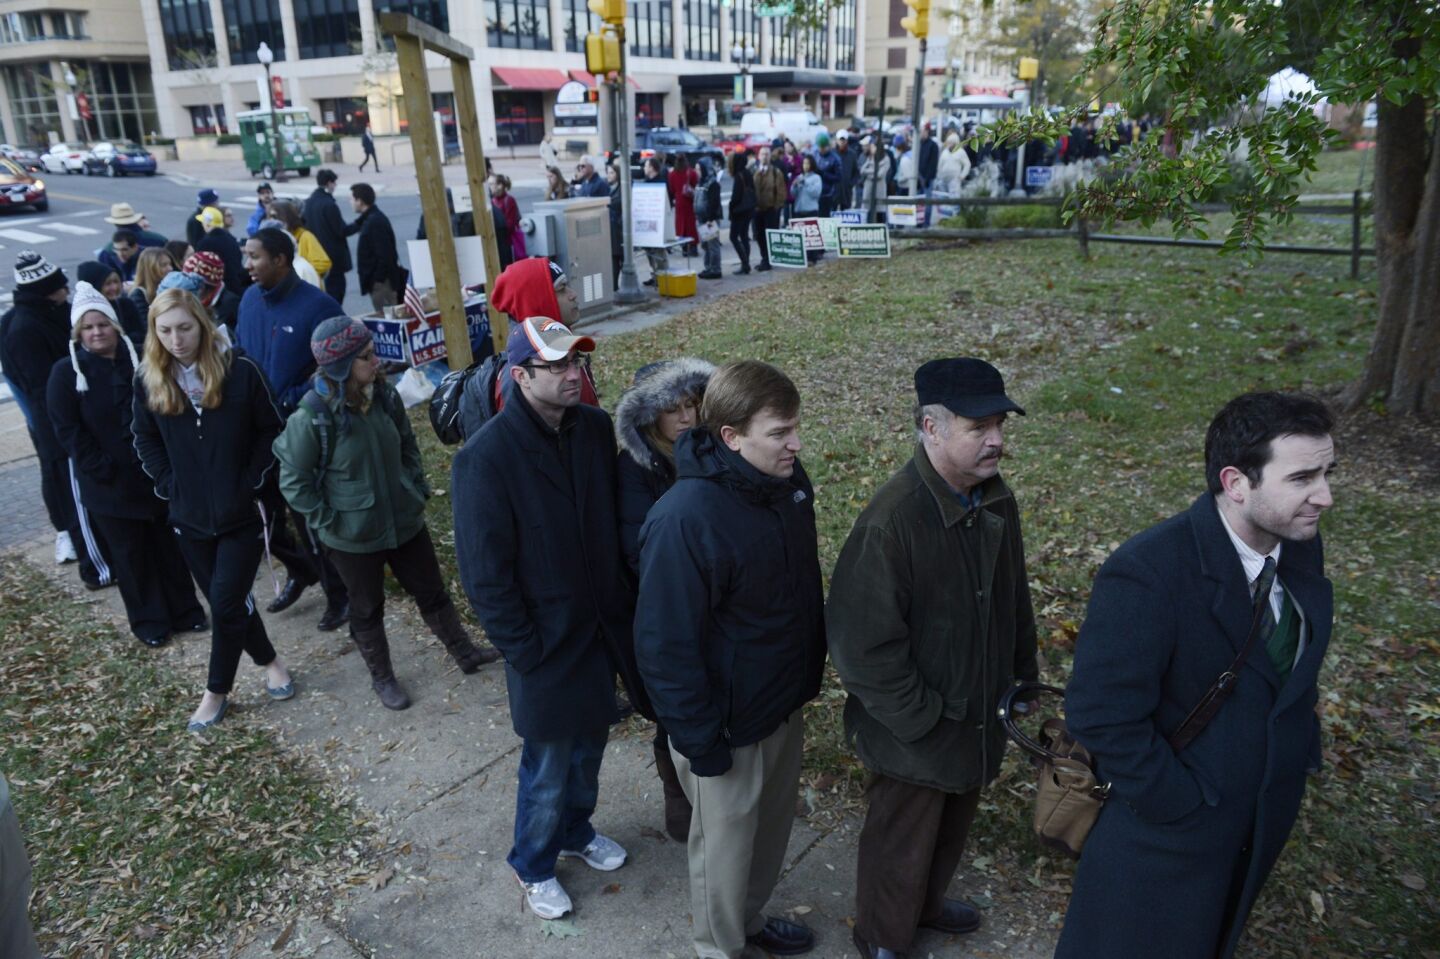 People wait in an estimated two-hour long line, that goes down the street and around the block, to vote at a polling site in Arlington, VA.